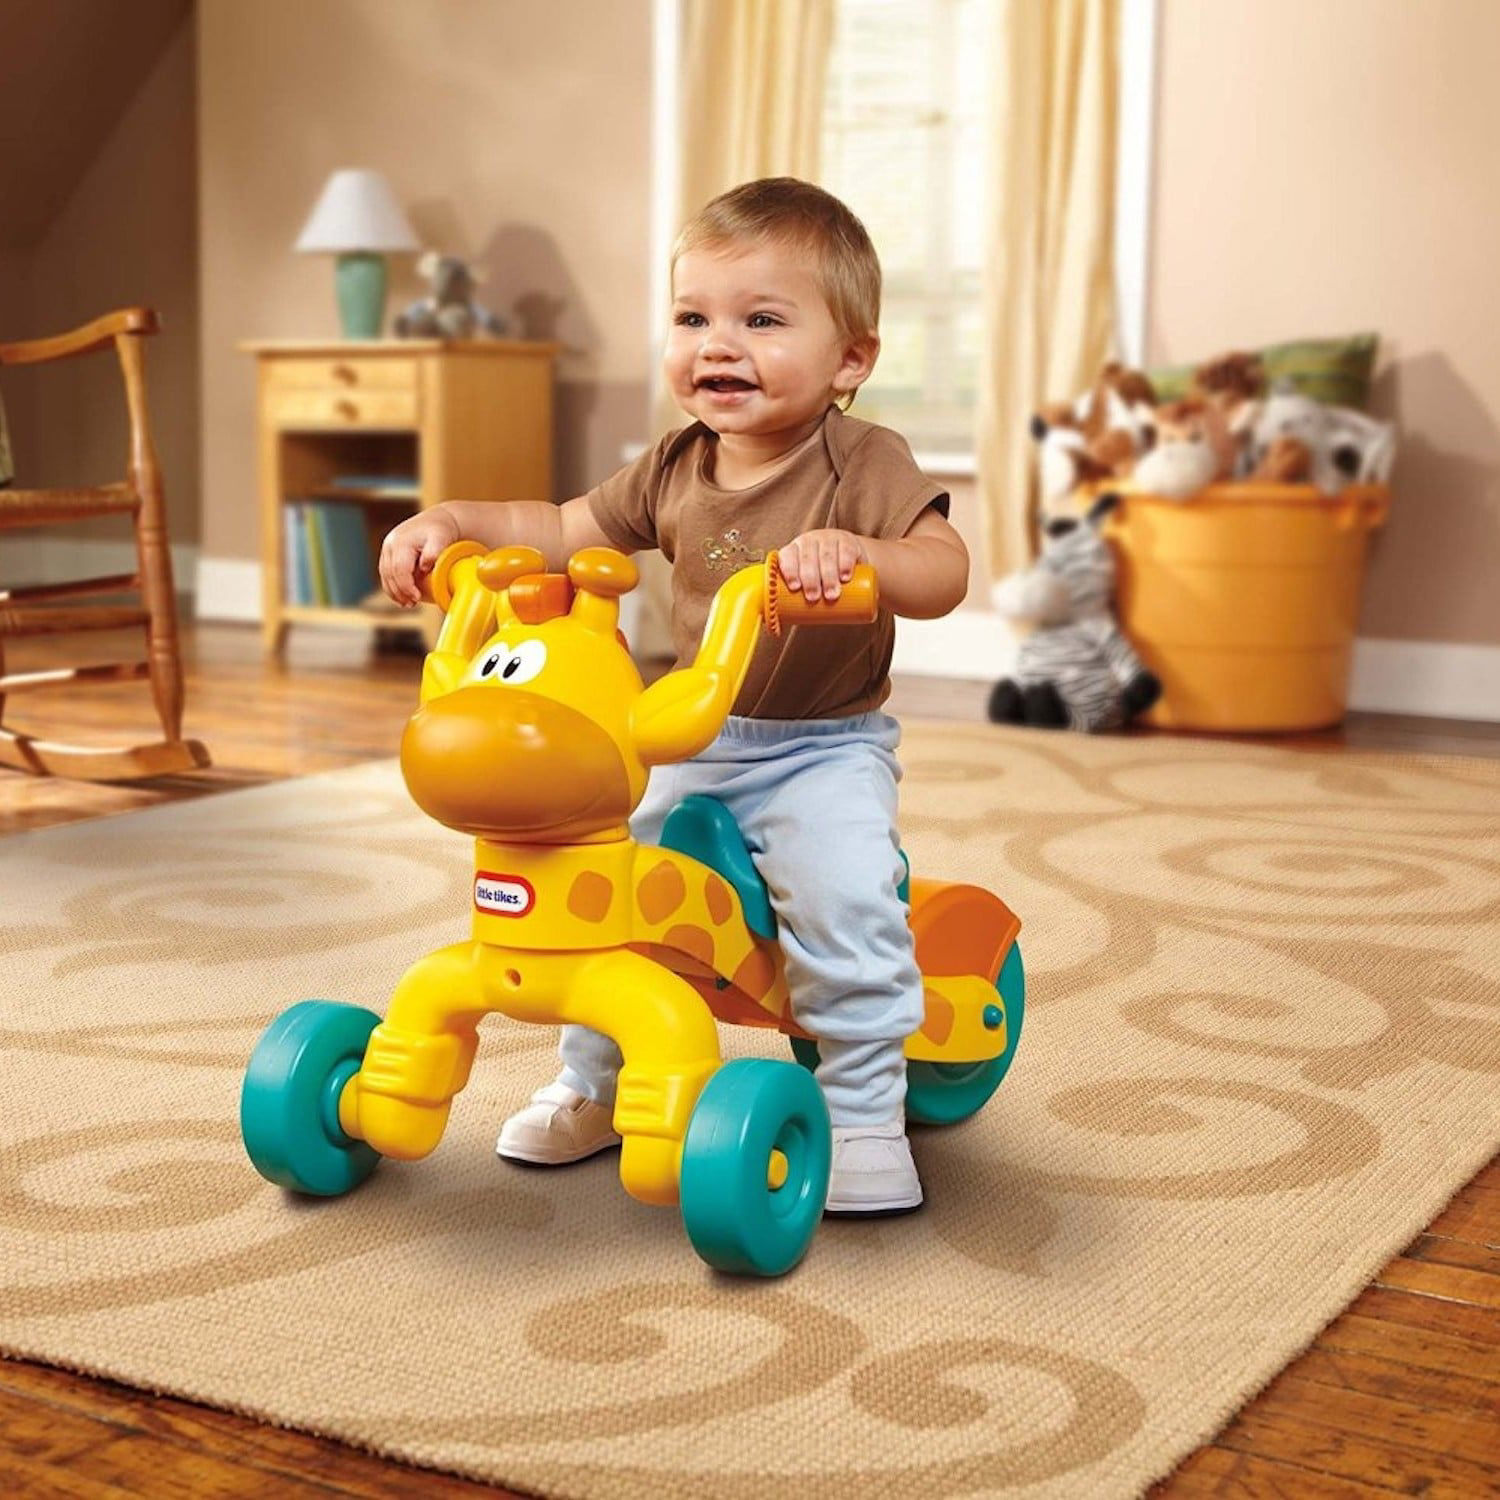 Best Toys for 1 Year Olds in 2023 - Gift Ideas for 1 Year Old